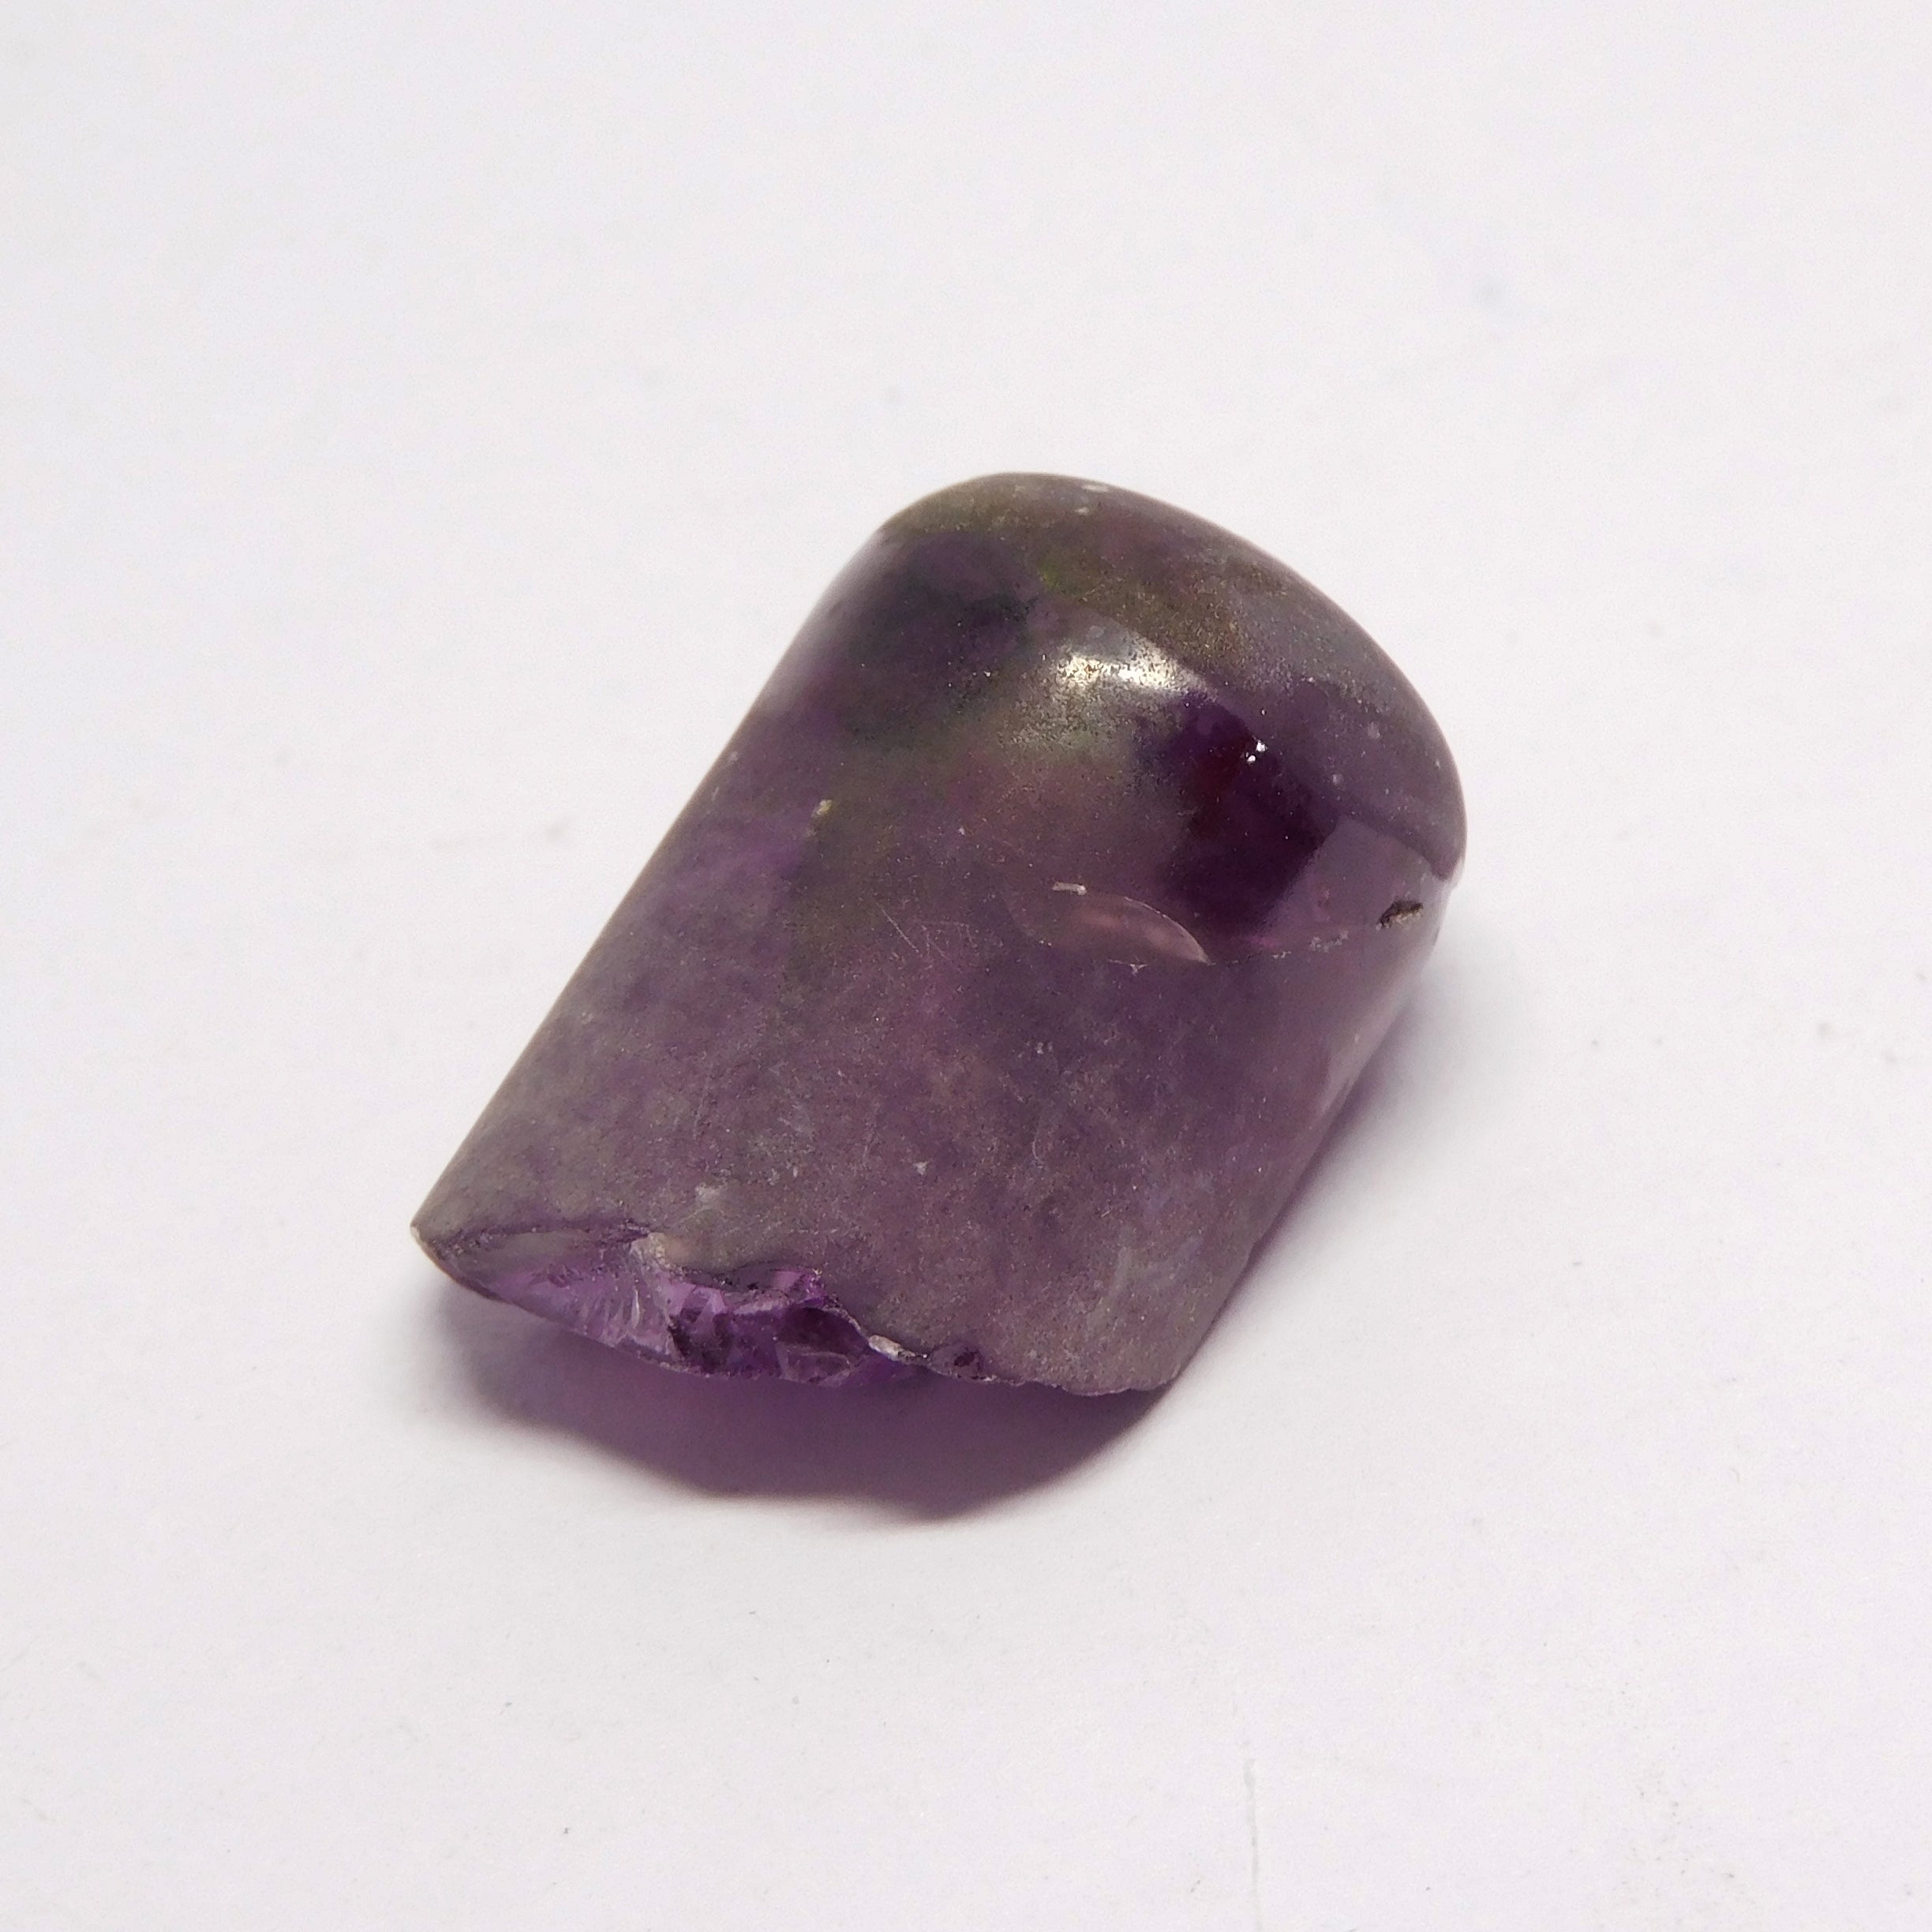 ON SALE !! Color Change Alexandrite 58.45 Carat Natural Alexandrite Rough From Russia CERTIFIED Loose Gemstone